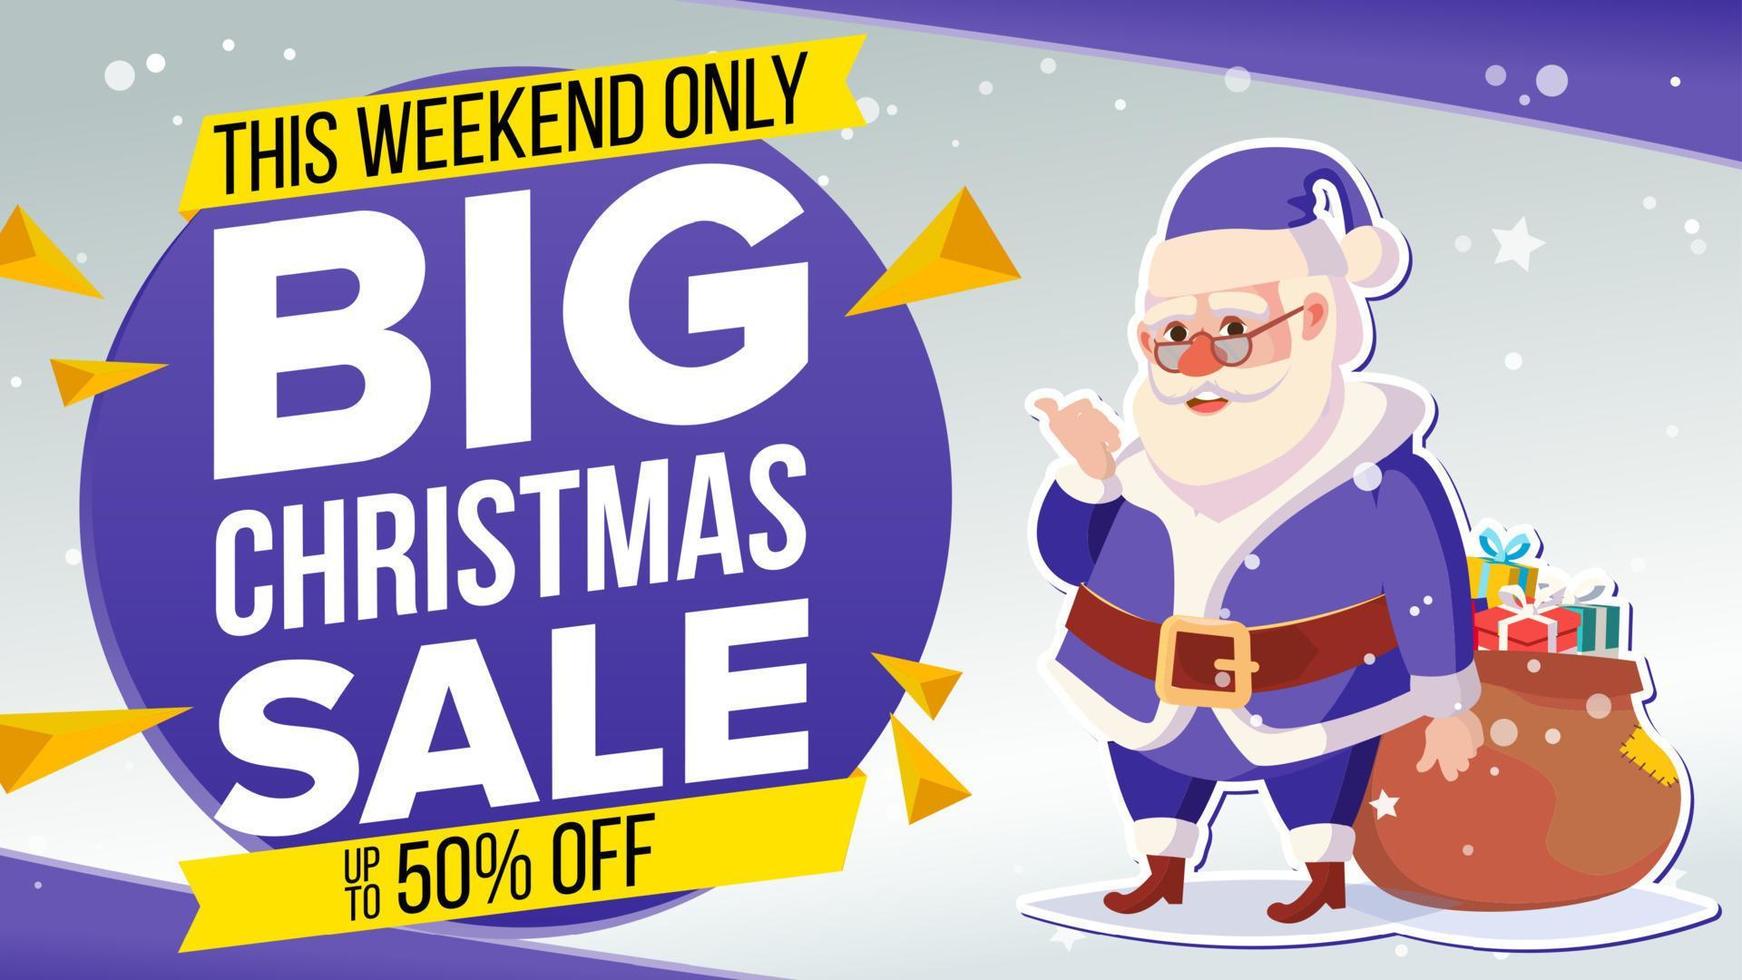 Christmas Sale Banner With Classic Santa Claus Vector. Advertising Design Illustration. Design For Xmas Party Poster, Brochure, Card, Shop Discount Advertising. vector